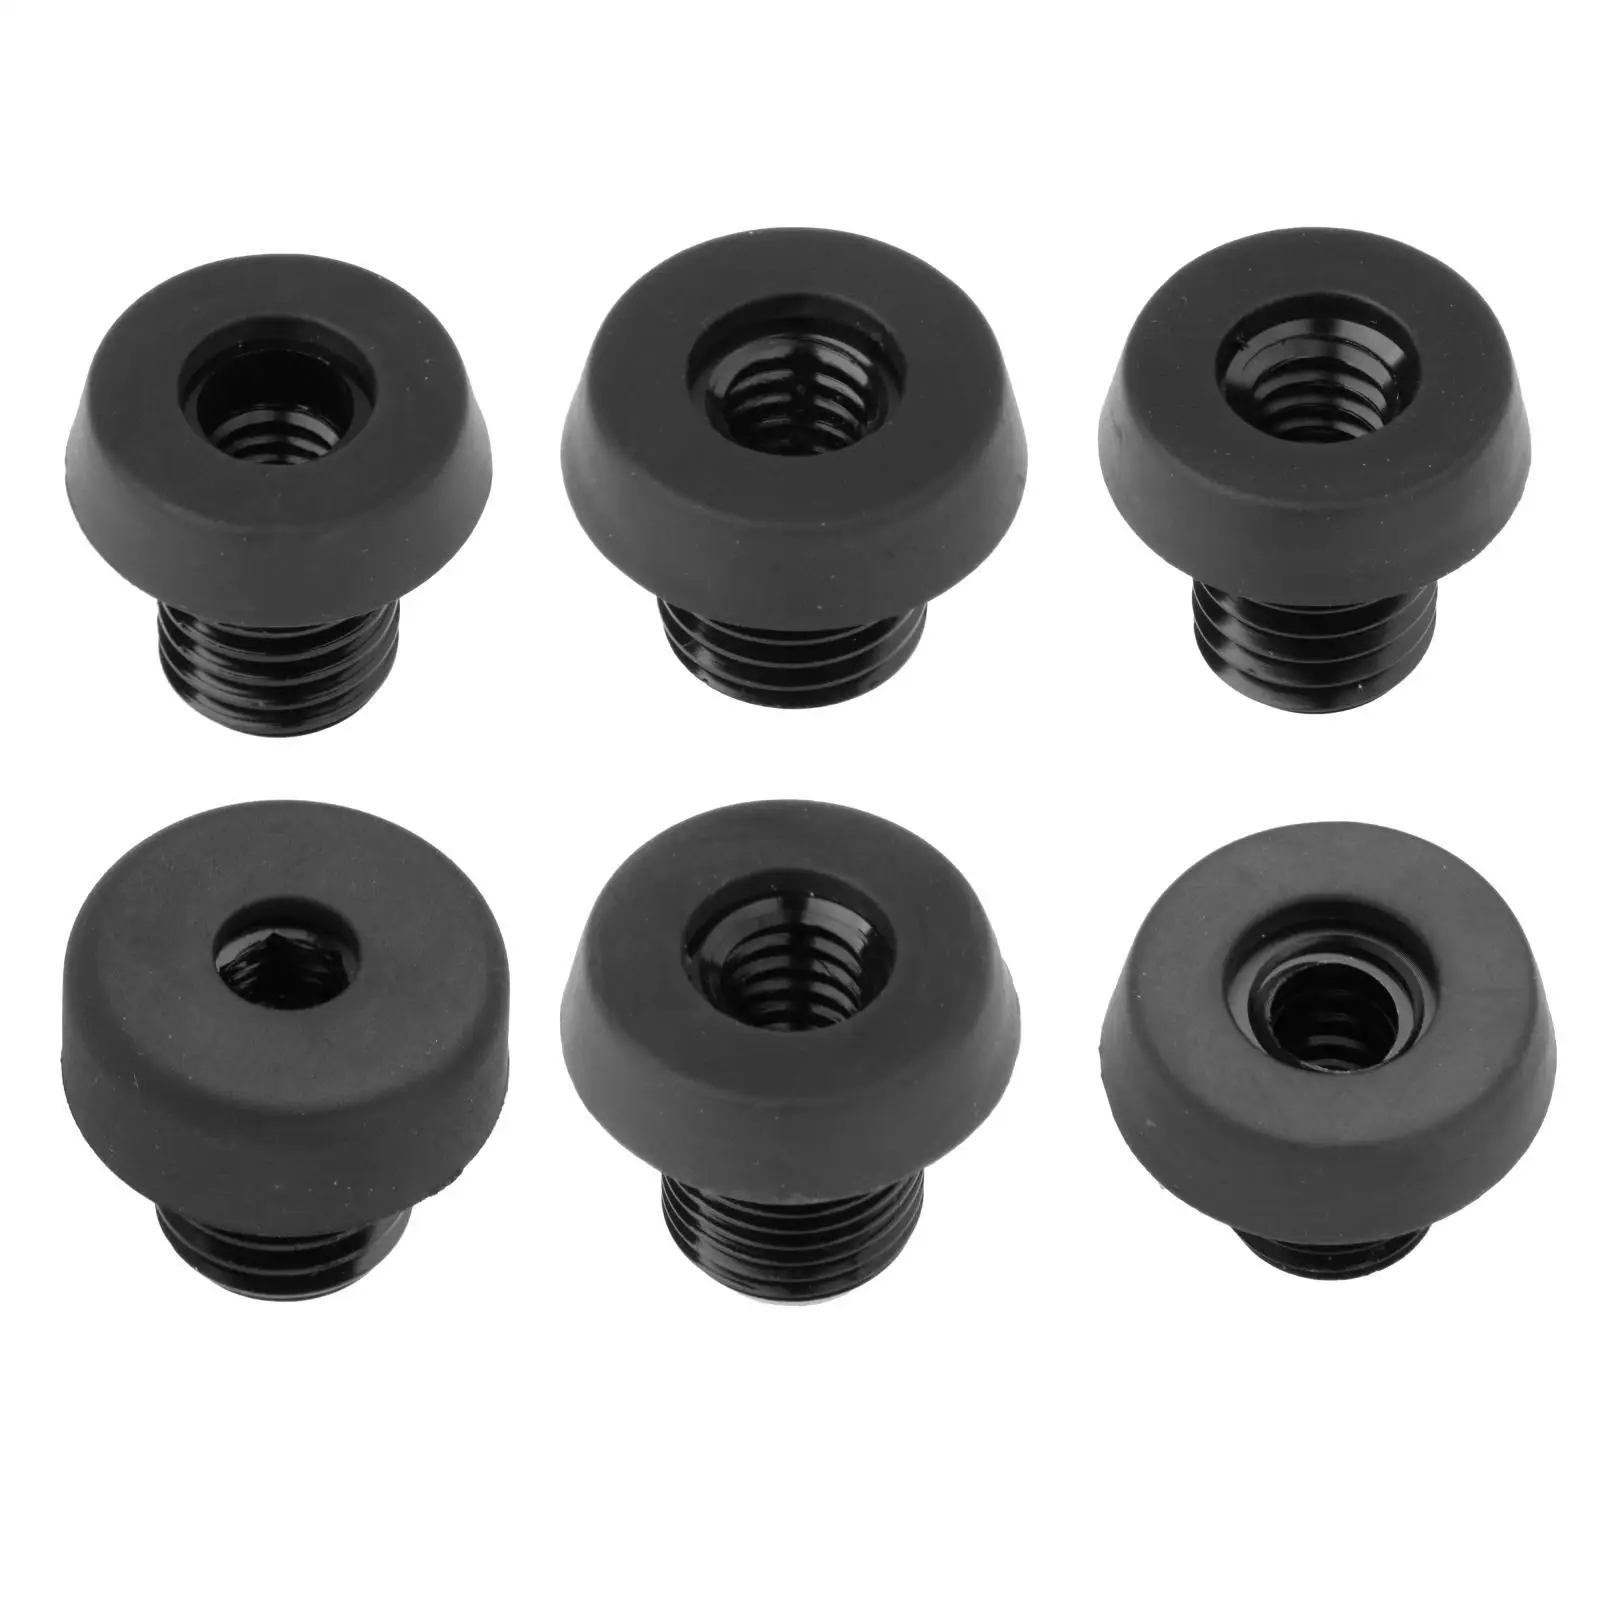 Billiard Bottom Plug Convenient for Playing Clubs Pool Table Most Pool Cues